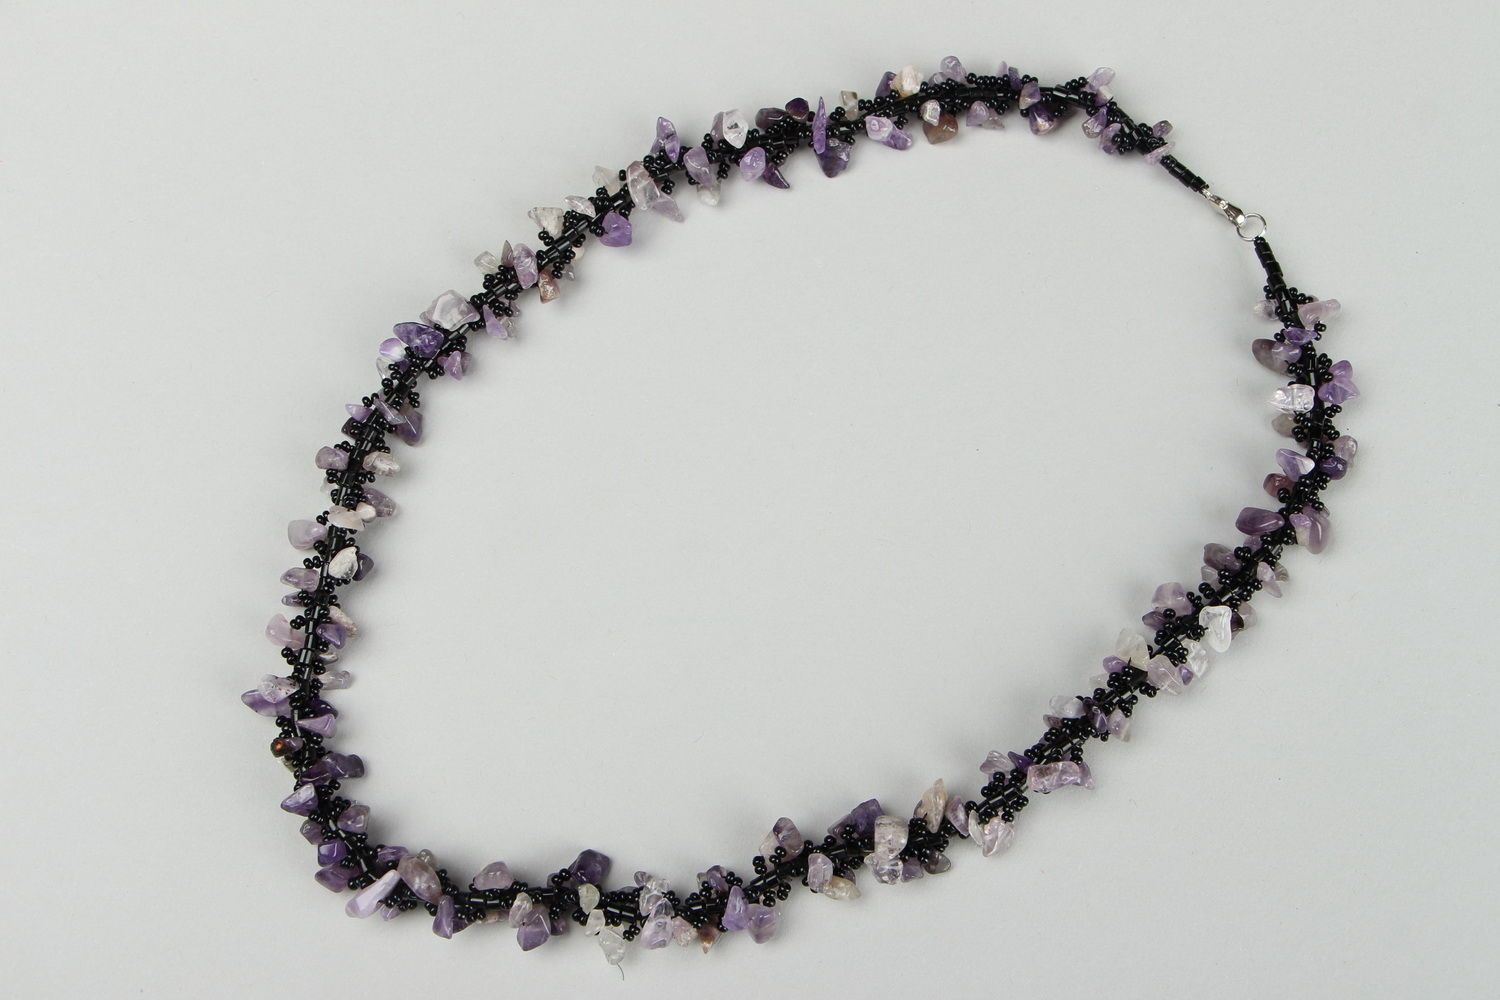 Necklace made of beads and amethyst photo 2